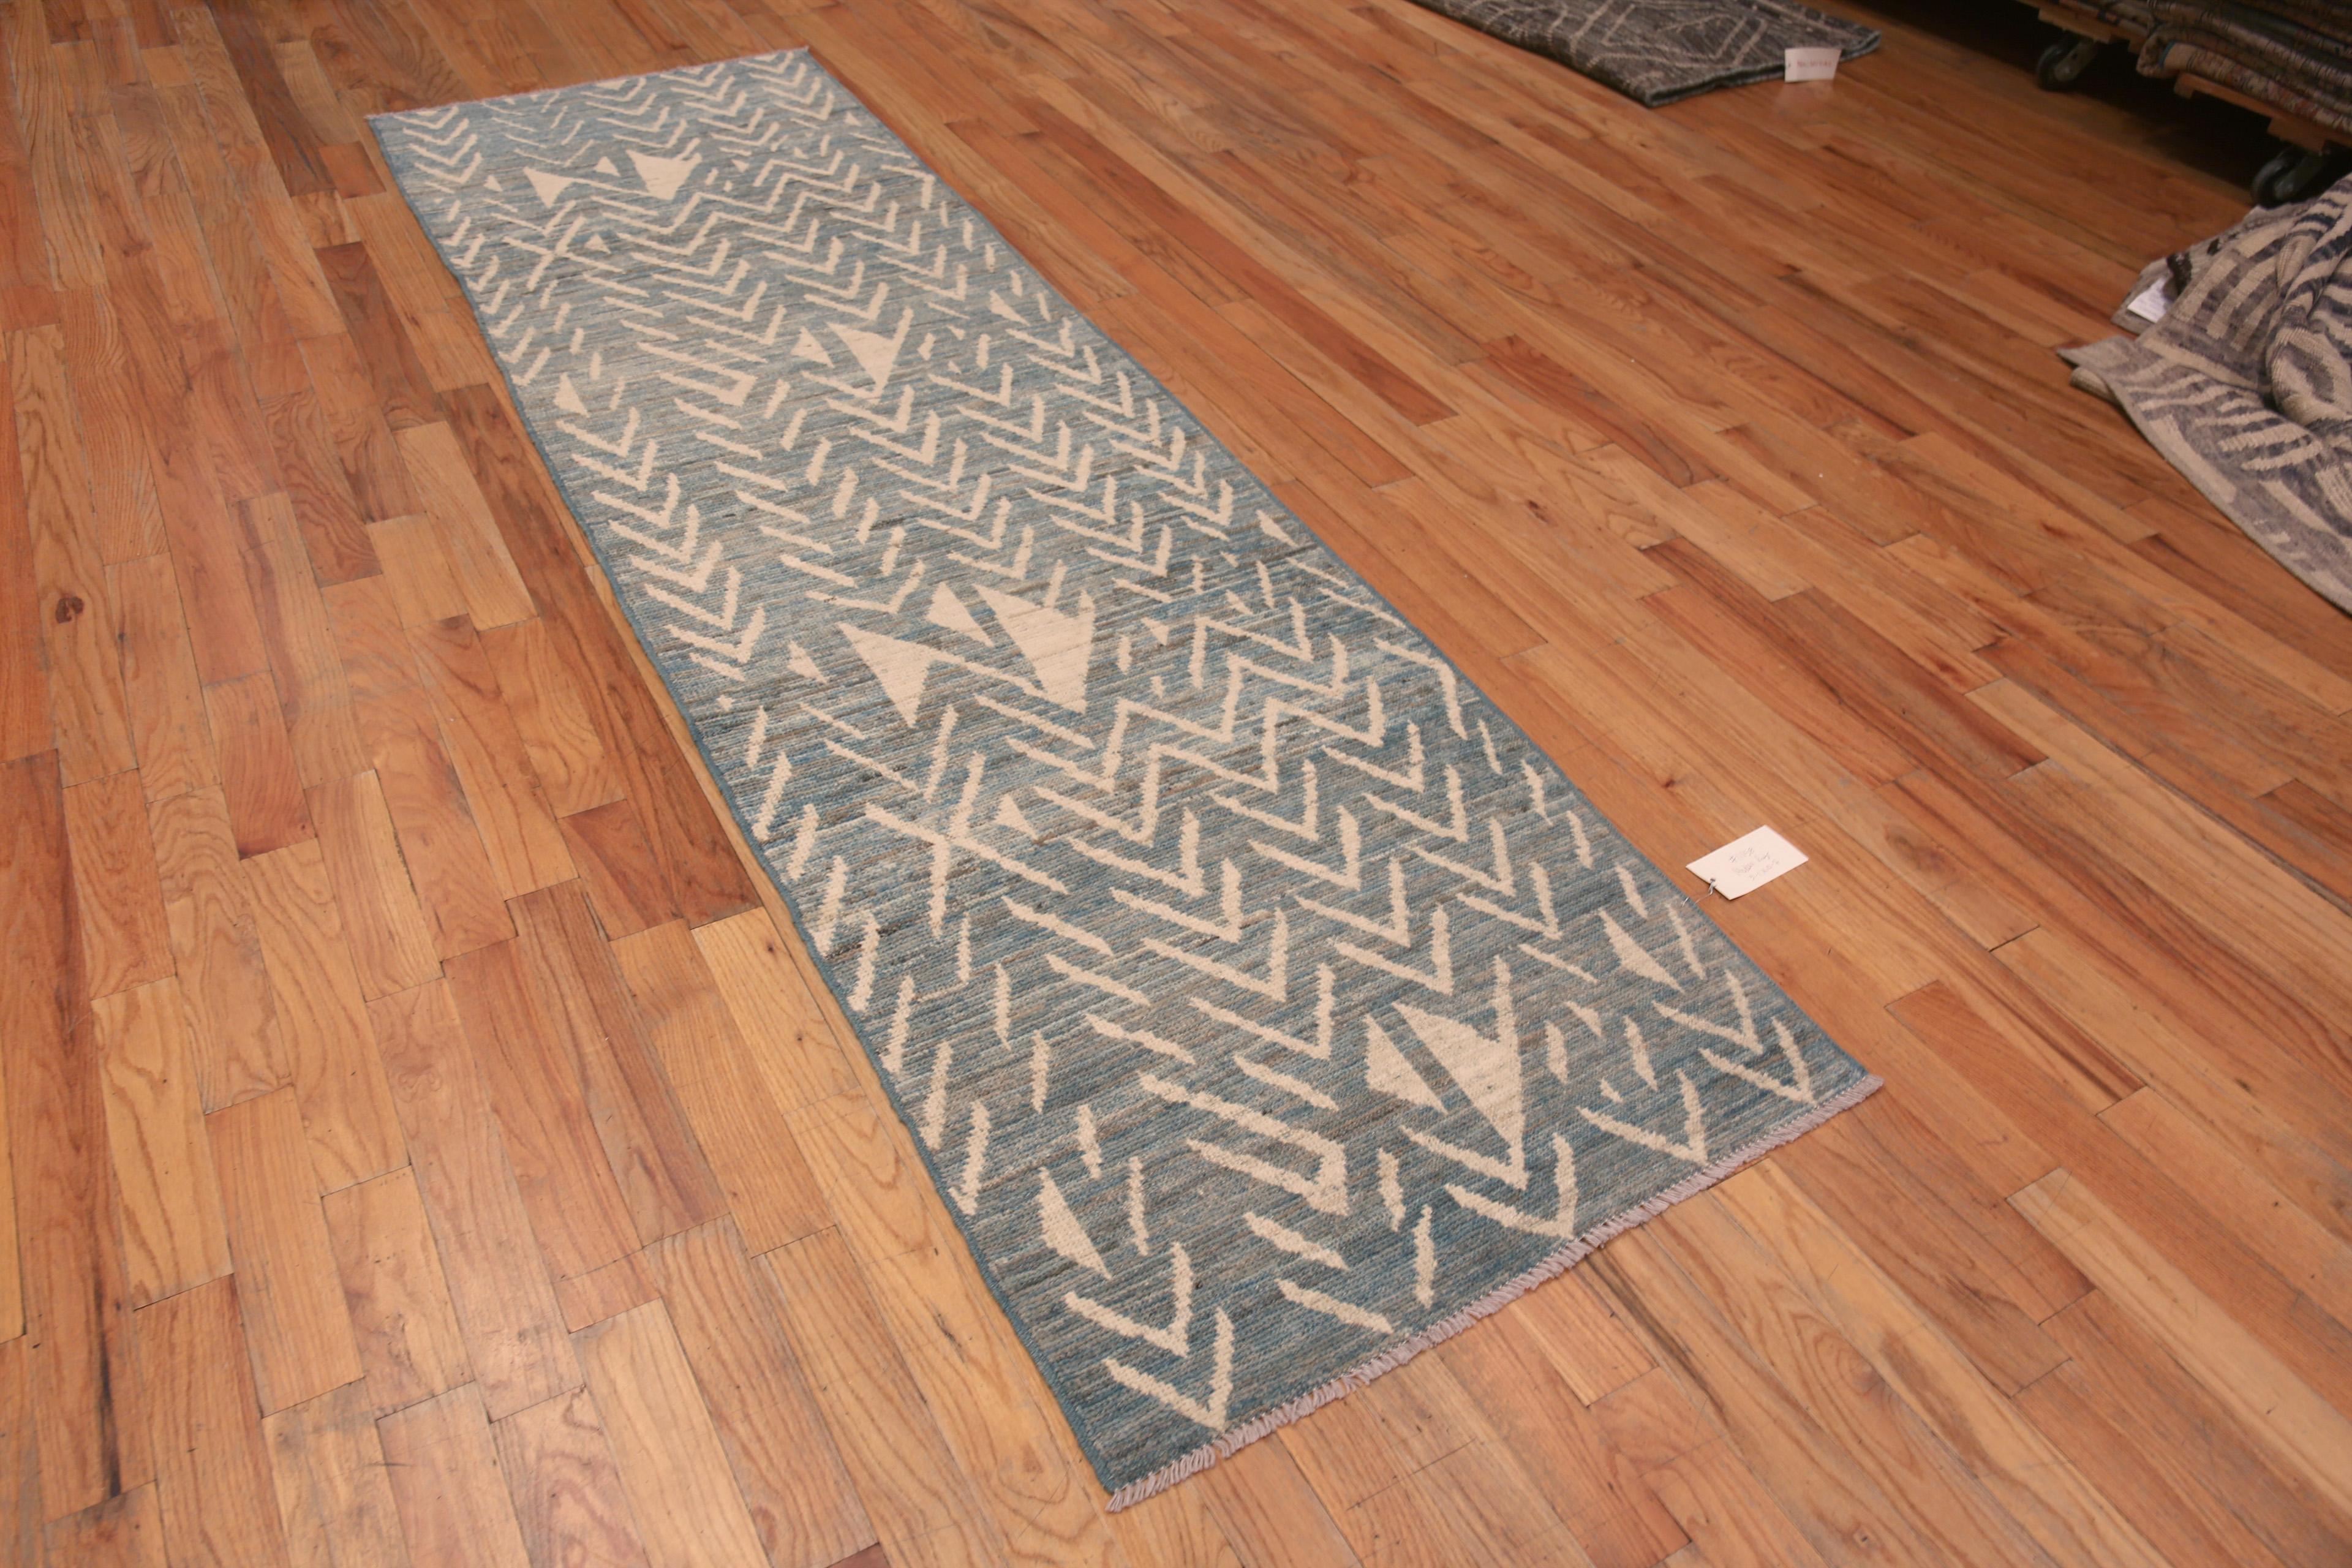 Hand-Knotted Nazmiyal Collection Tribal Geometric Design Hallway Runner Rug 3'5